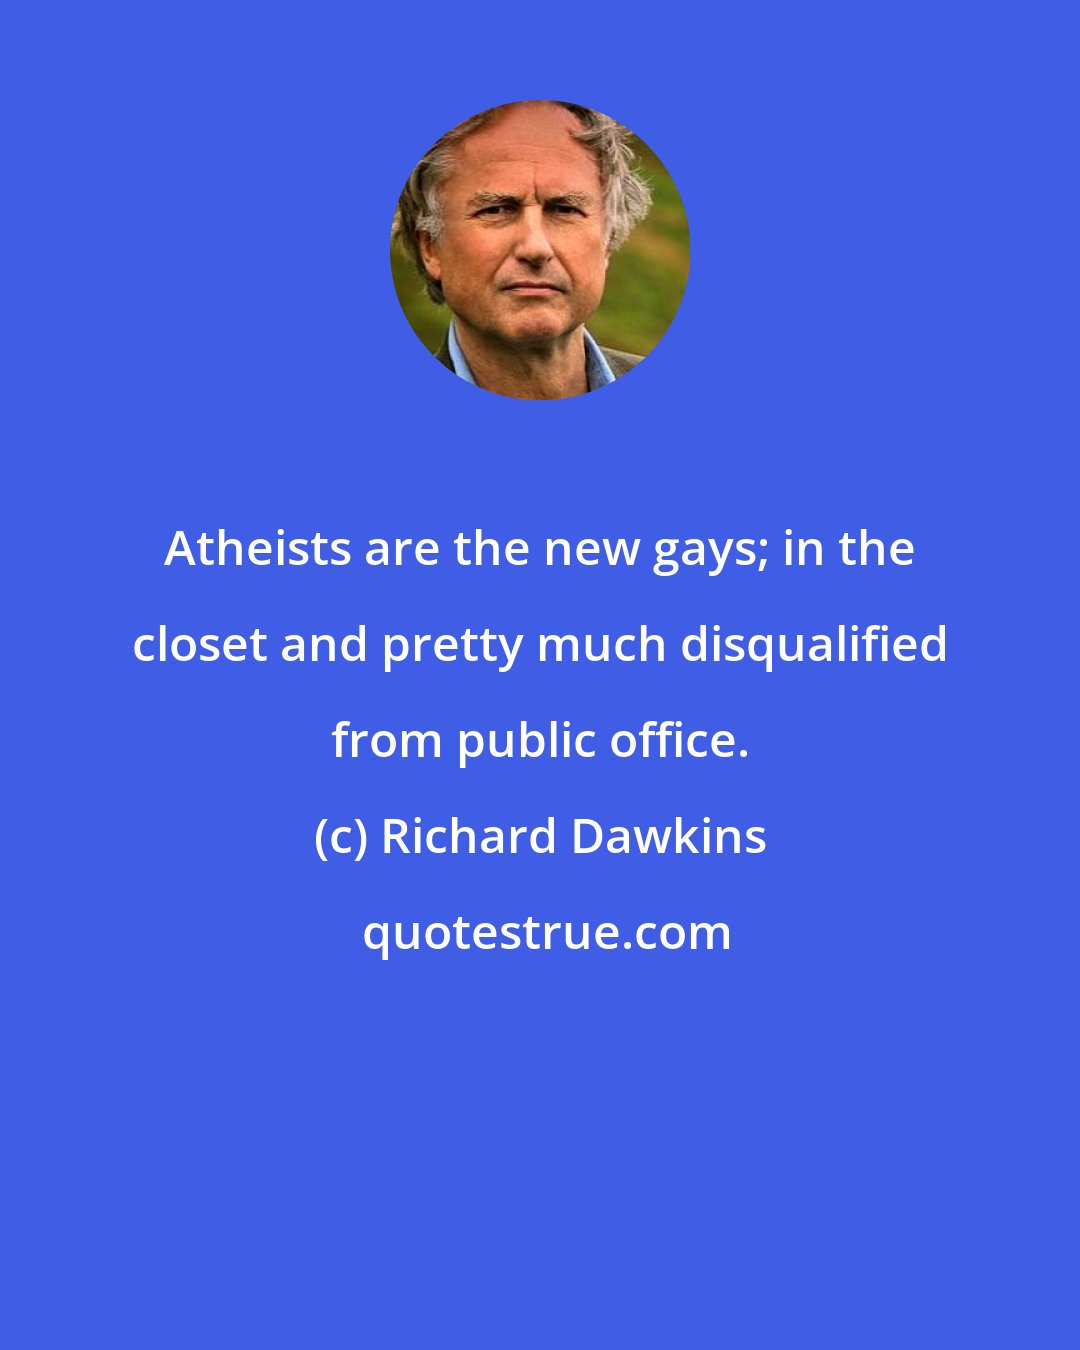 Richard Dawkins: Atheists are the new gays; in the closet and pretty much disqualified from public office.